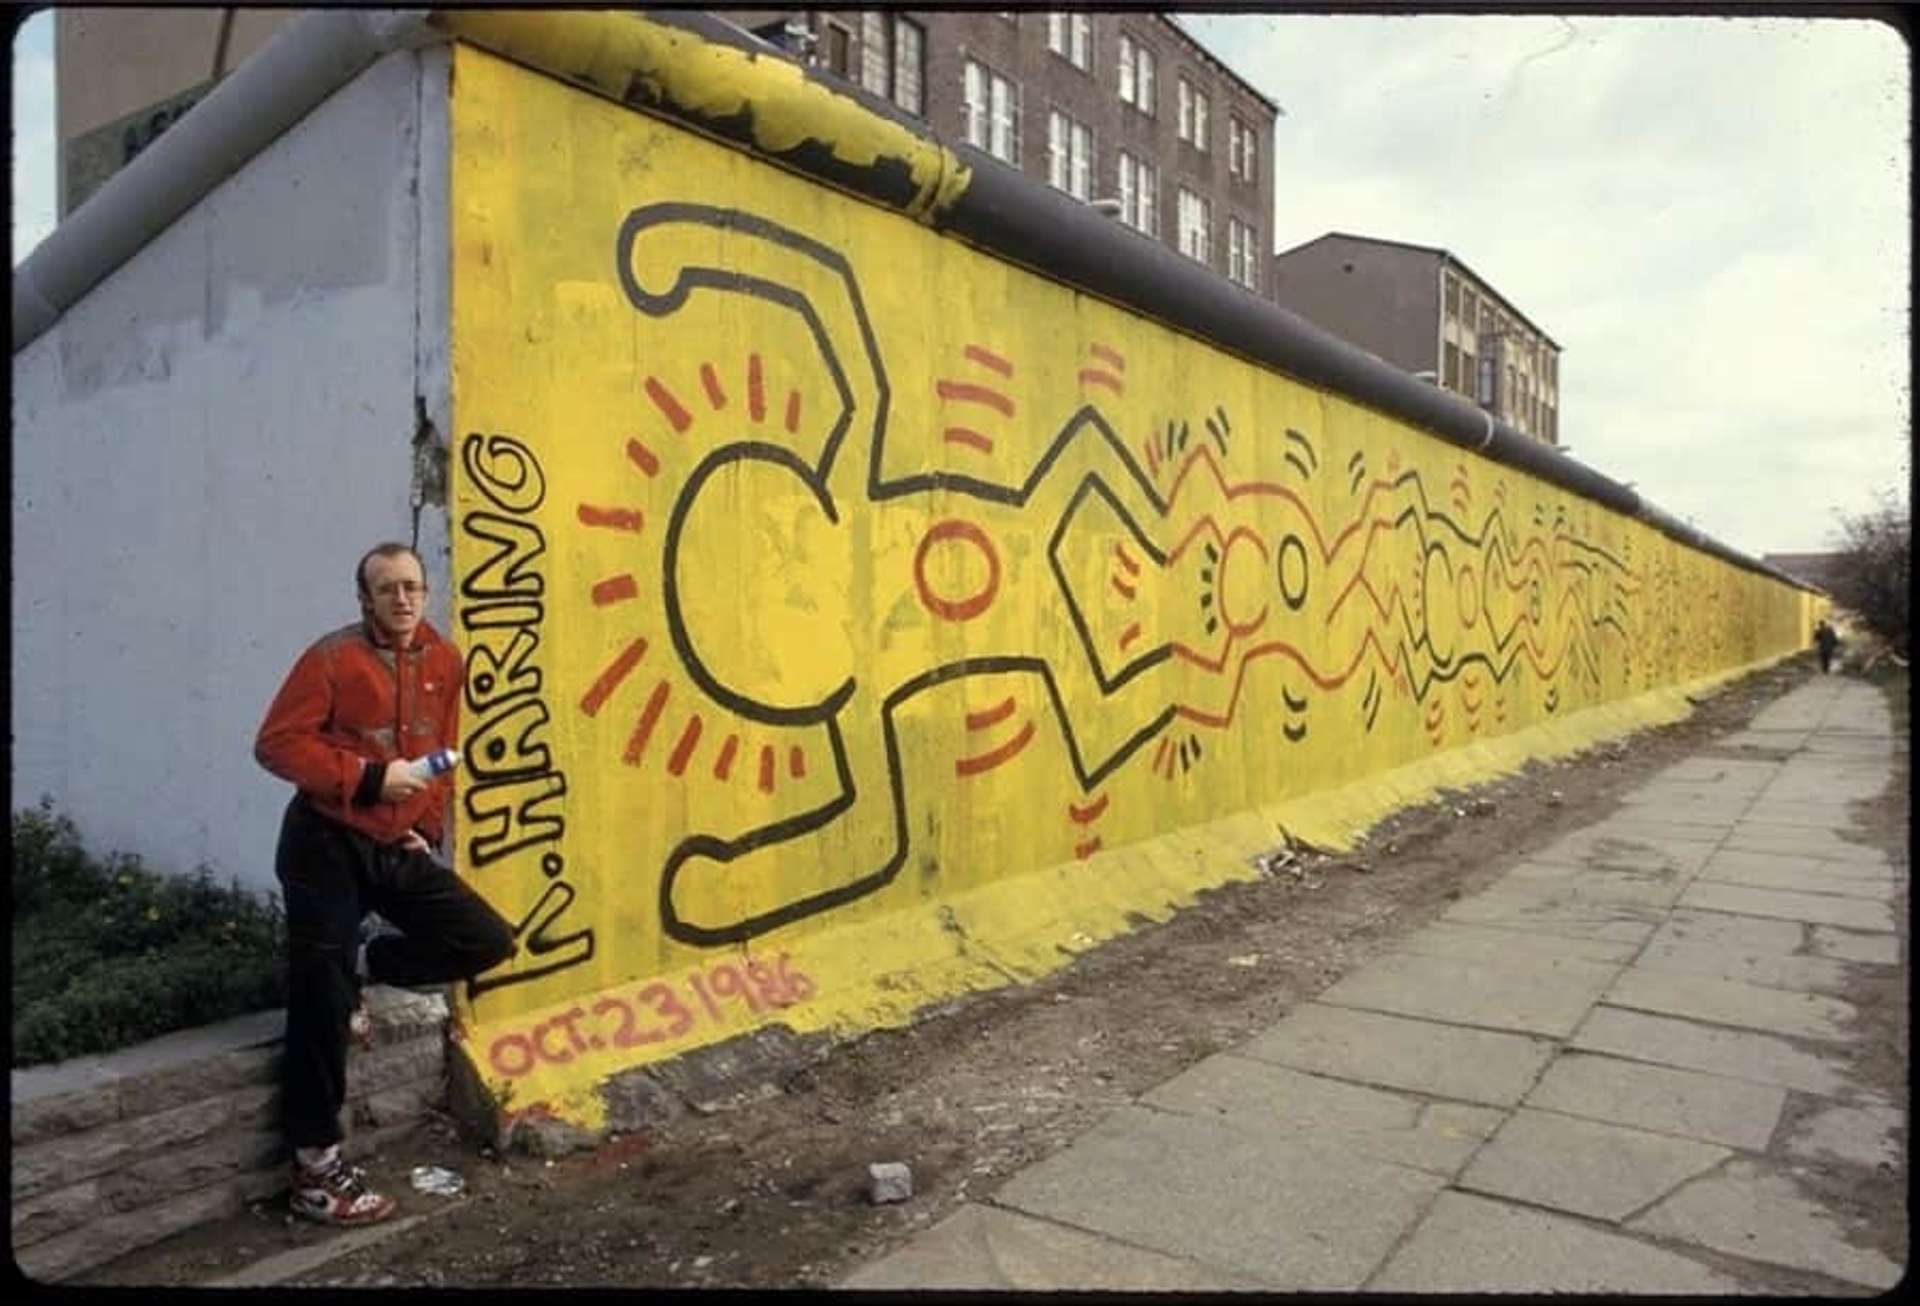 A photograph of artist Keith Haring standing in front of his mural on the Berlin Wall. The mural shows several connected figures in red and black, against a yellow background.